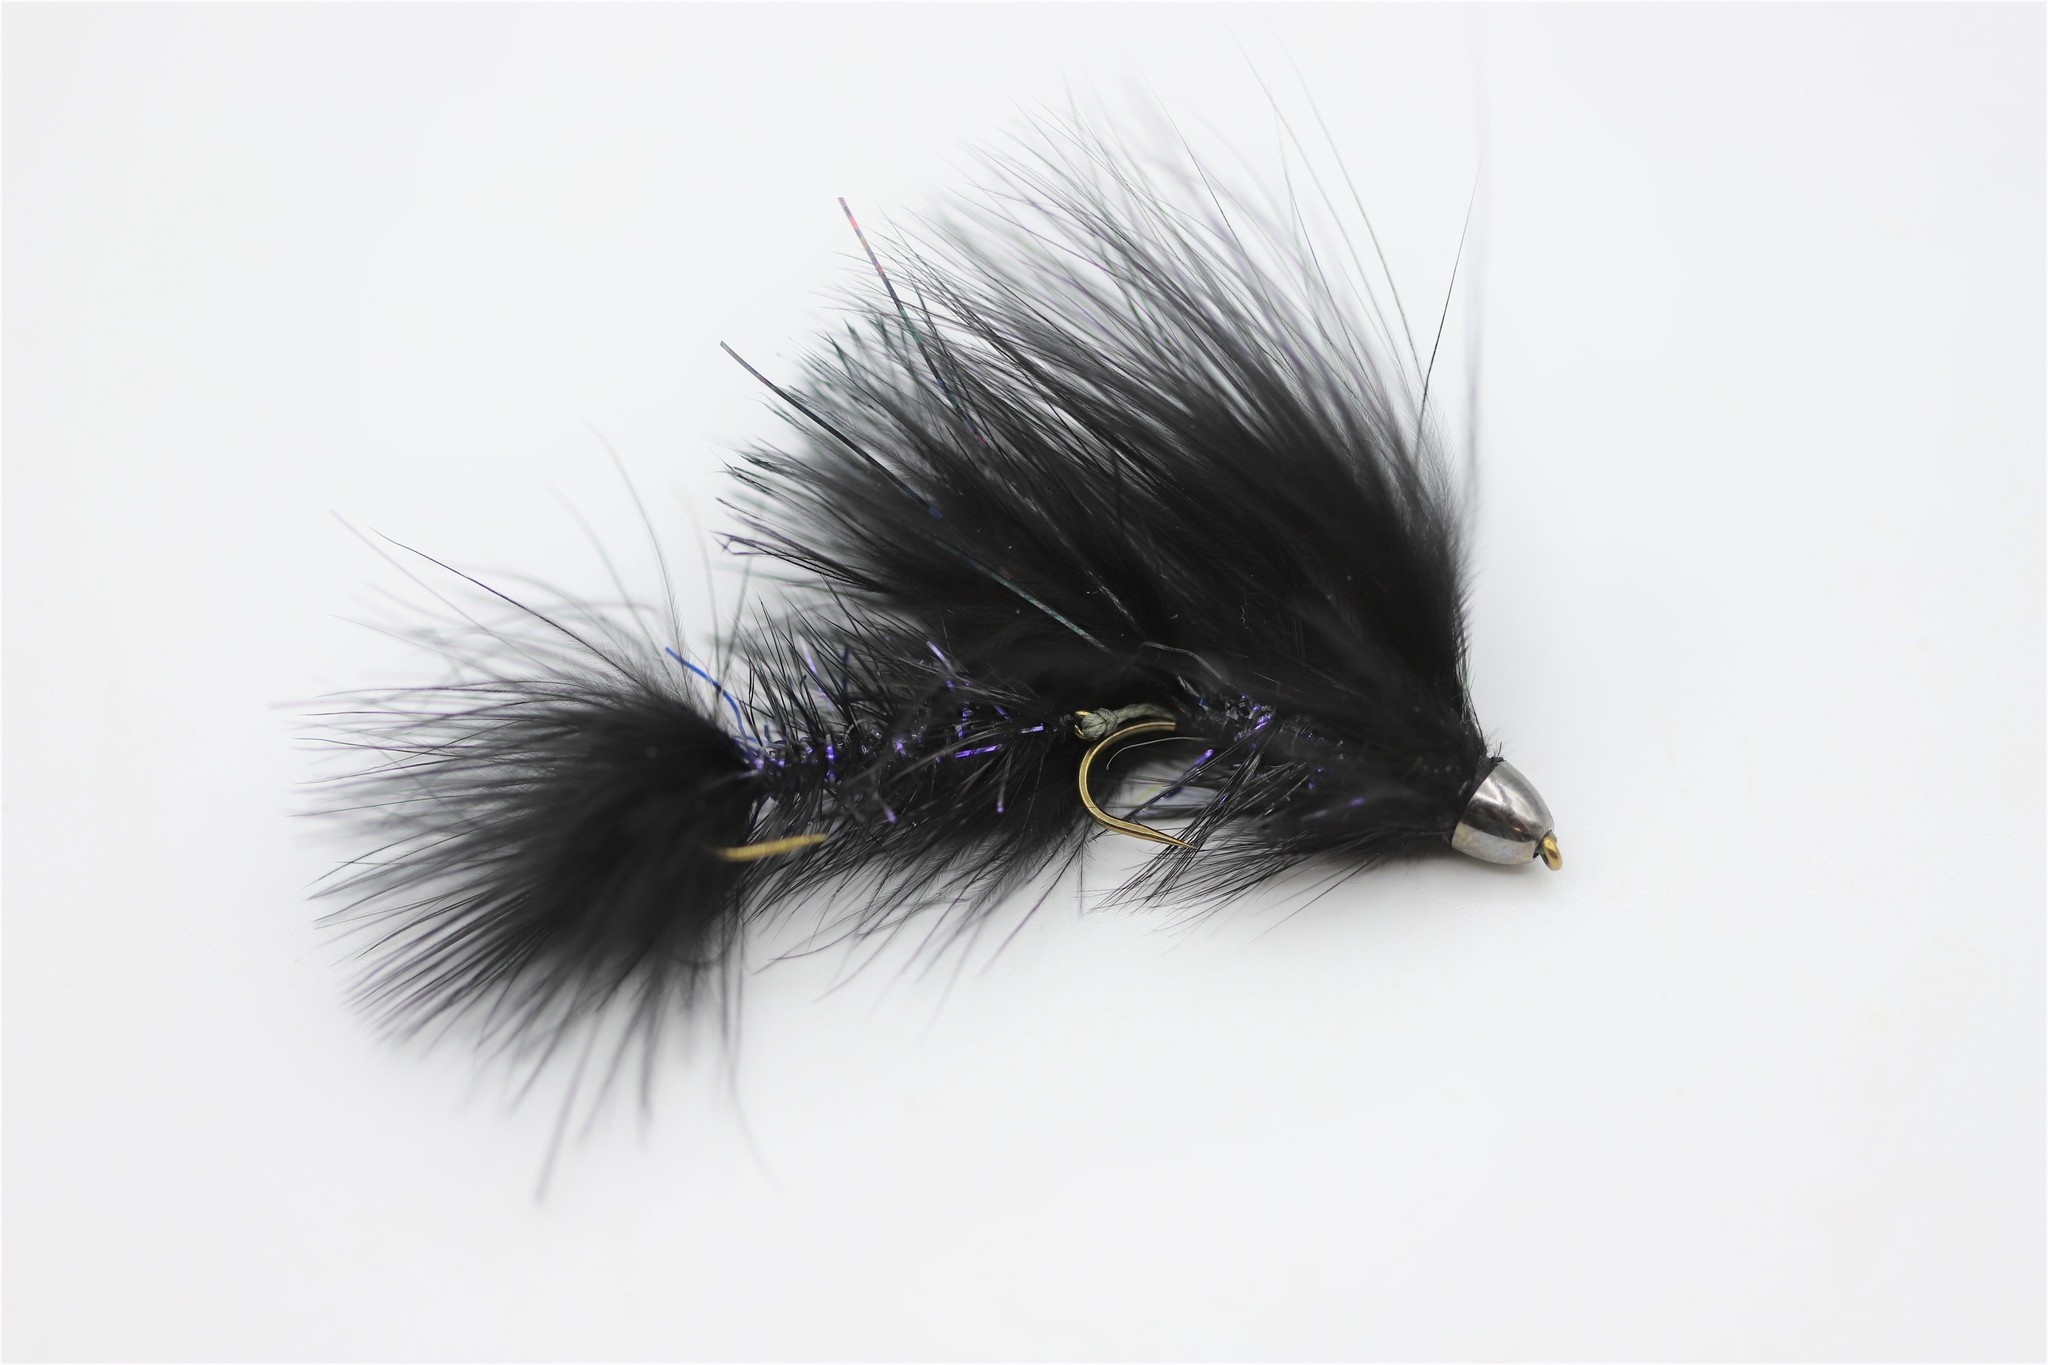 THE NEW EBONY STREAMER IS NOW IN STOCK! 